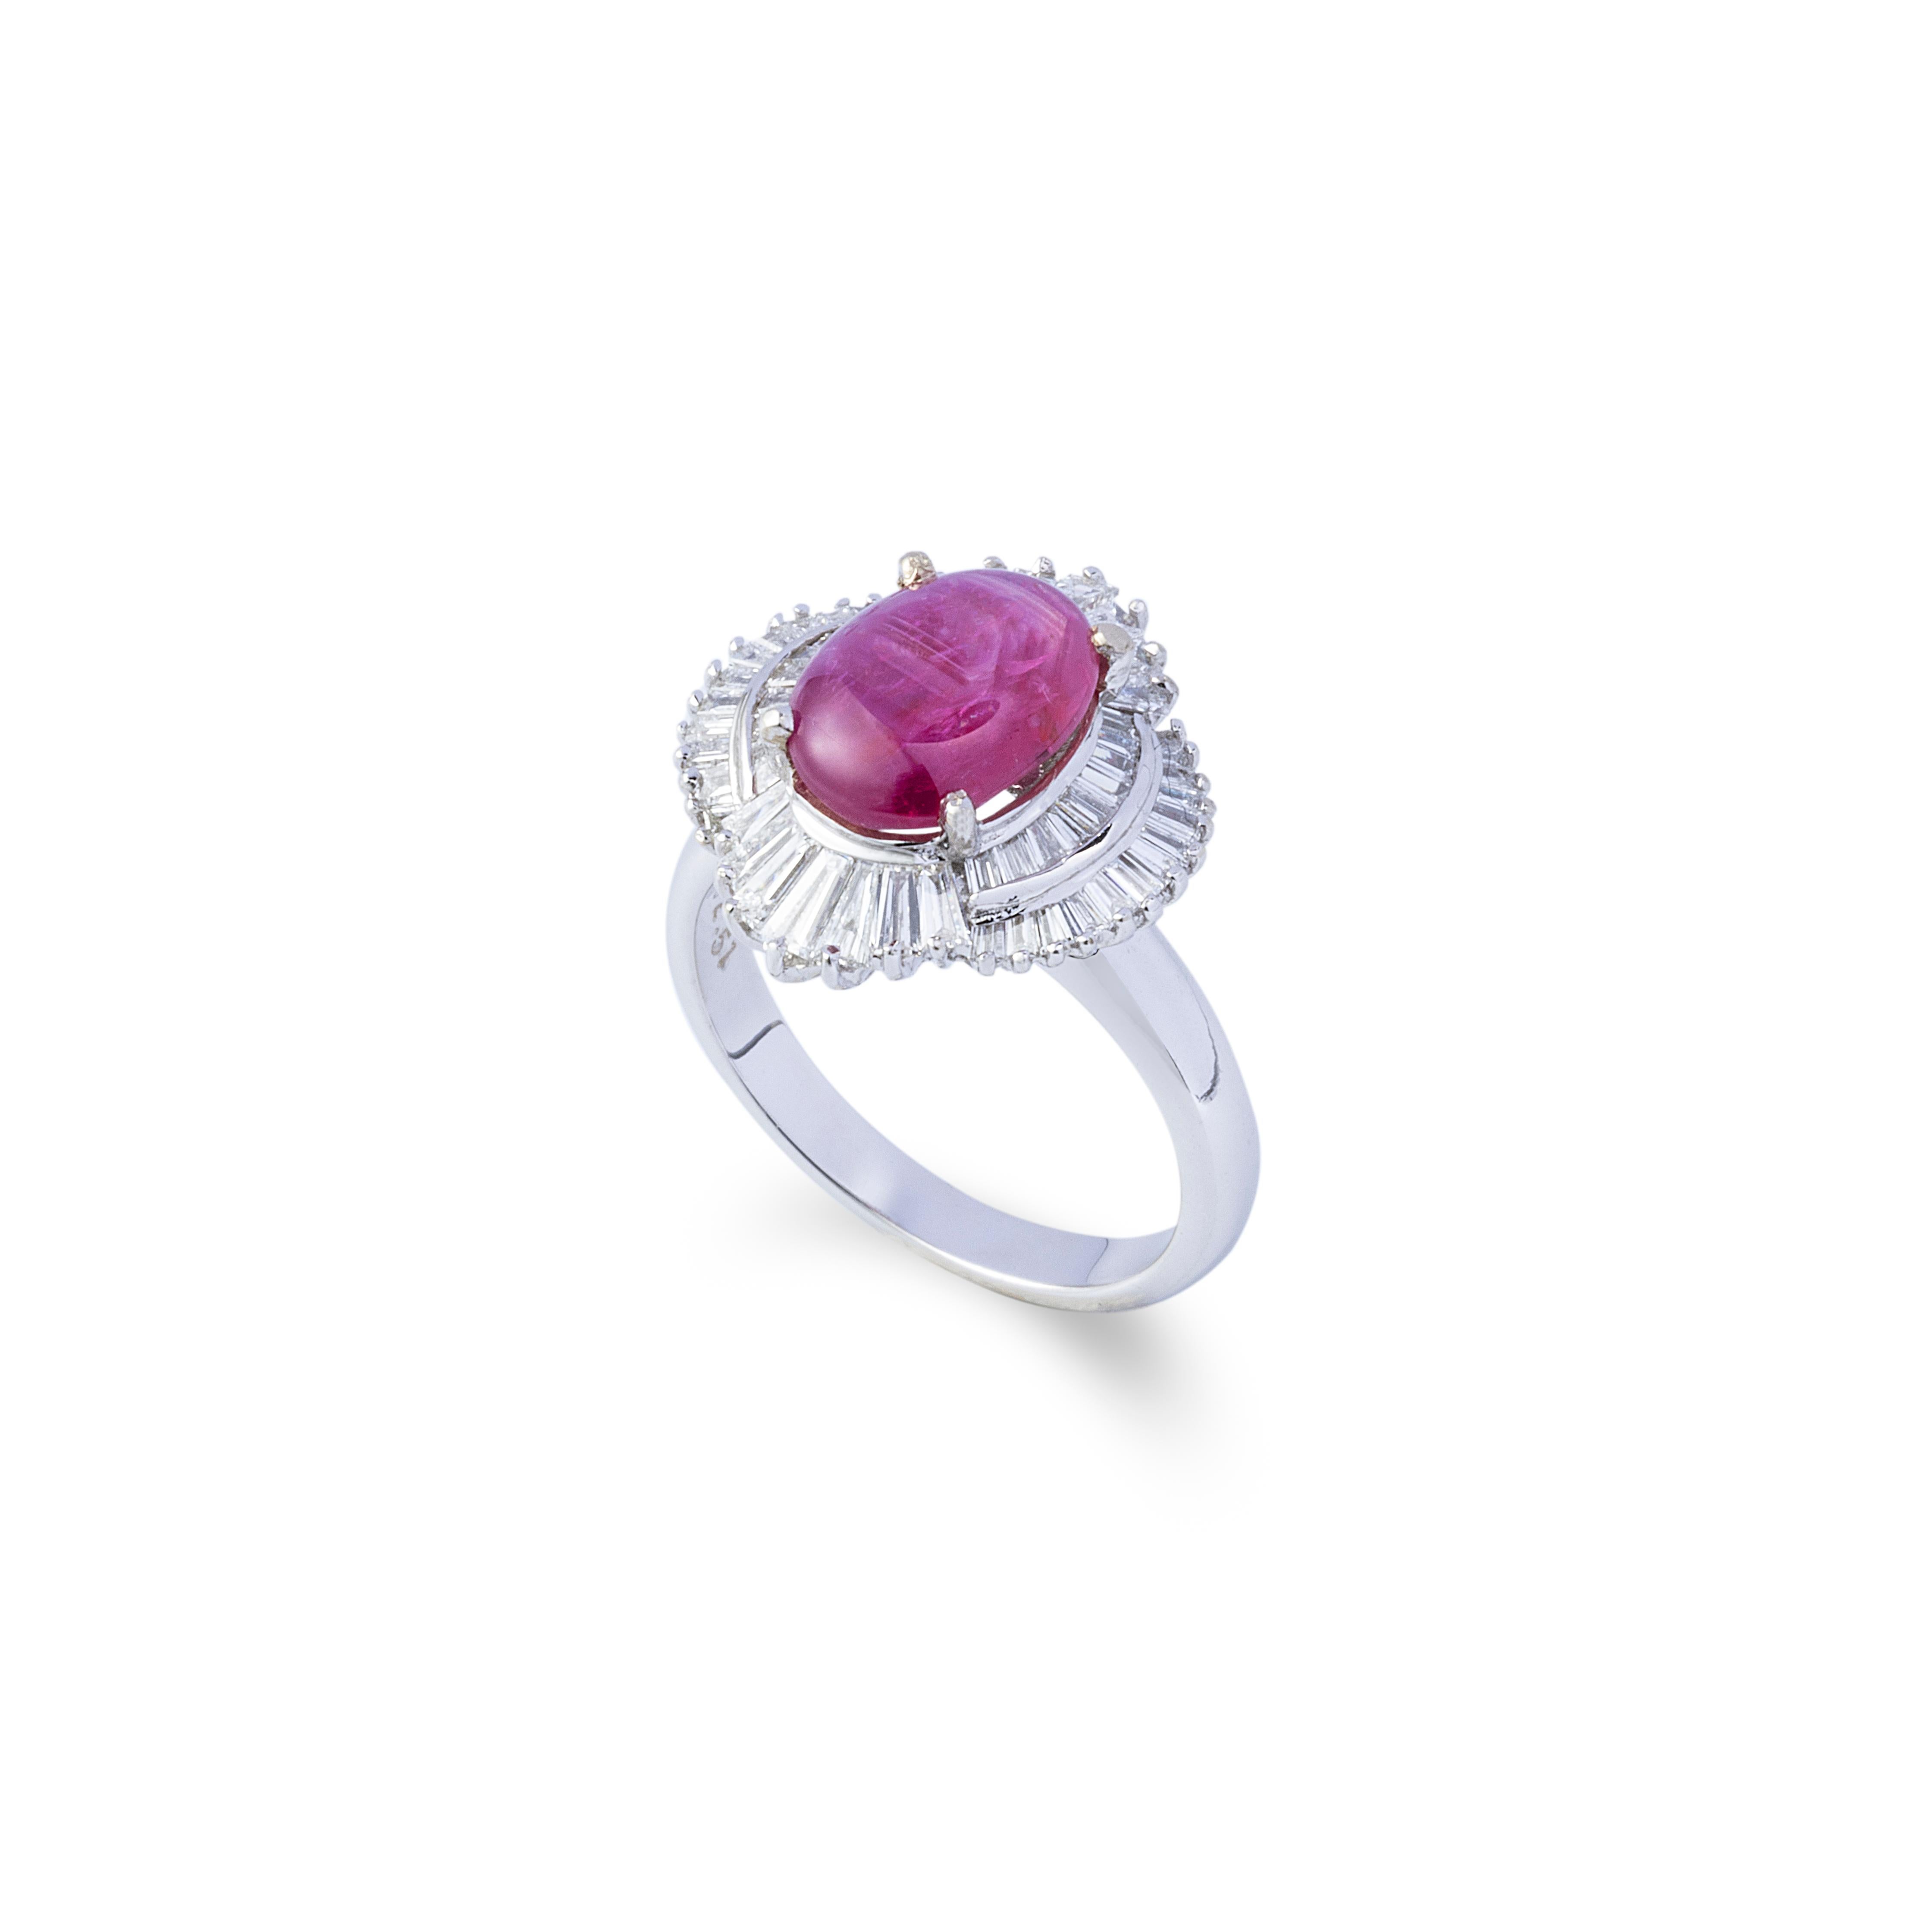 A marvelous neo-vintage fine ring for special occasions!  This ring is made in the 1990's. The piece comes with a GIA report number 6351327440 on the wonderful Star ruby which notes that the gemstone is unheated. The dimension of the stone is